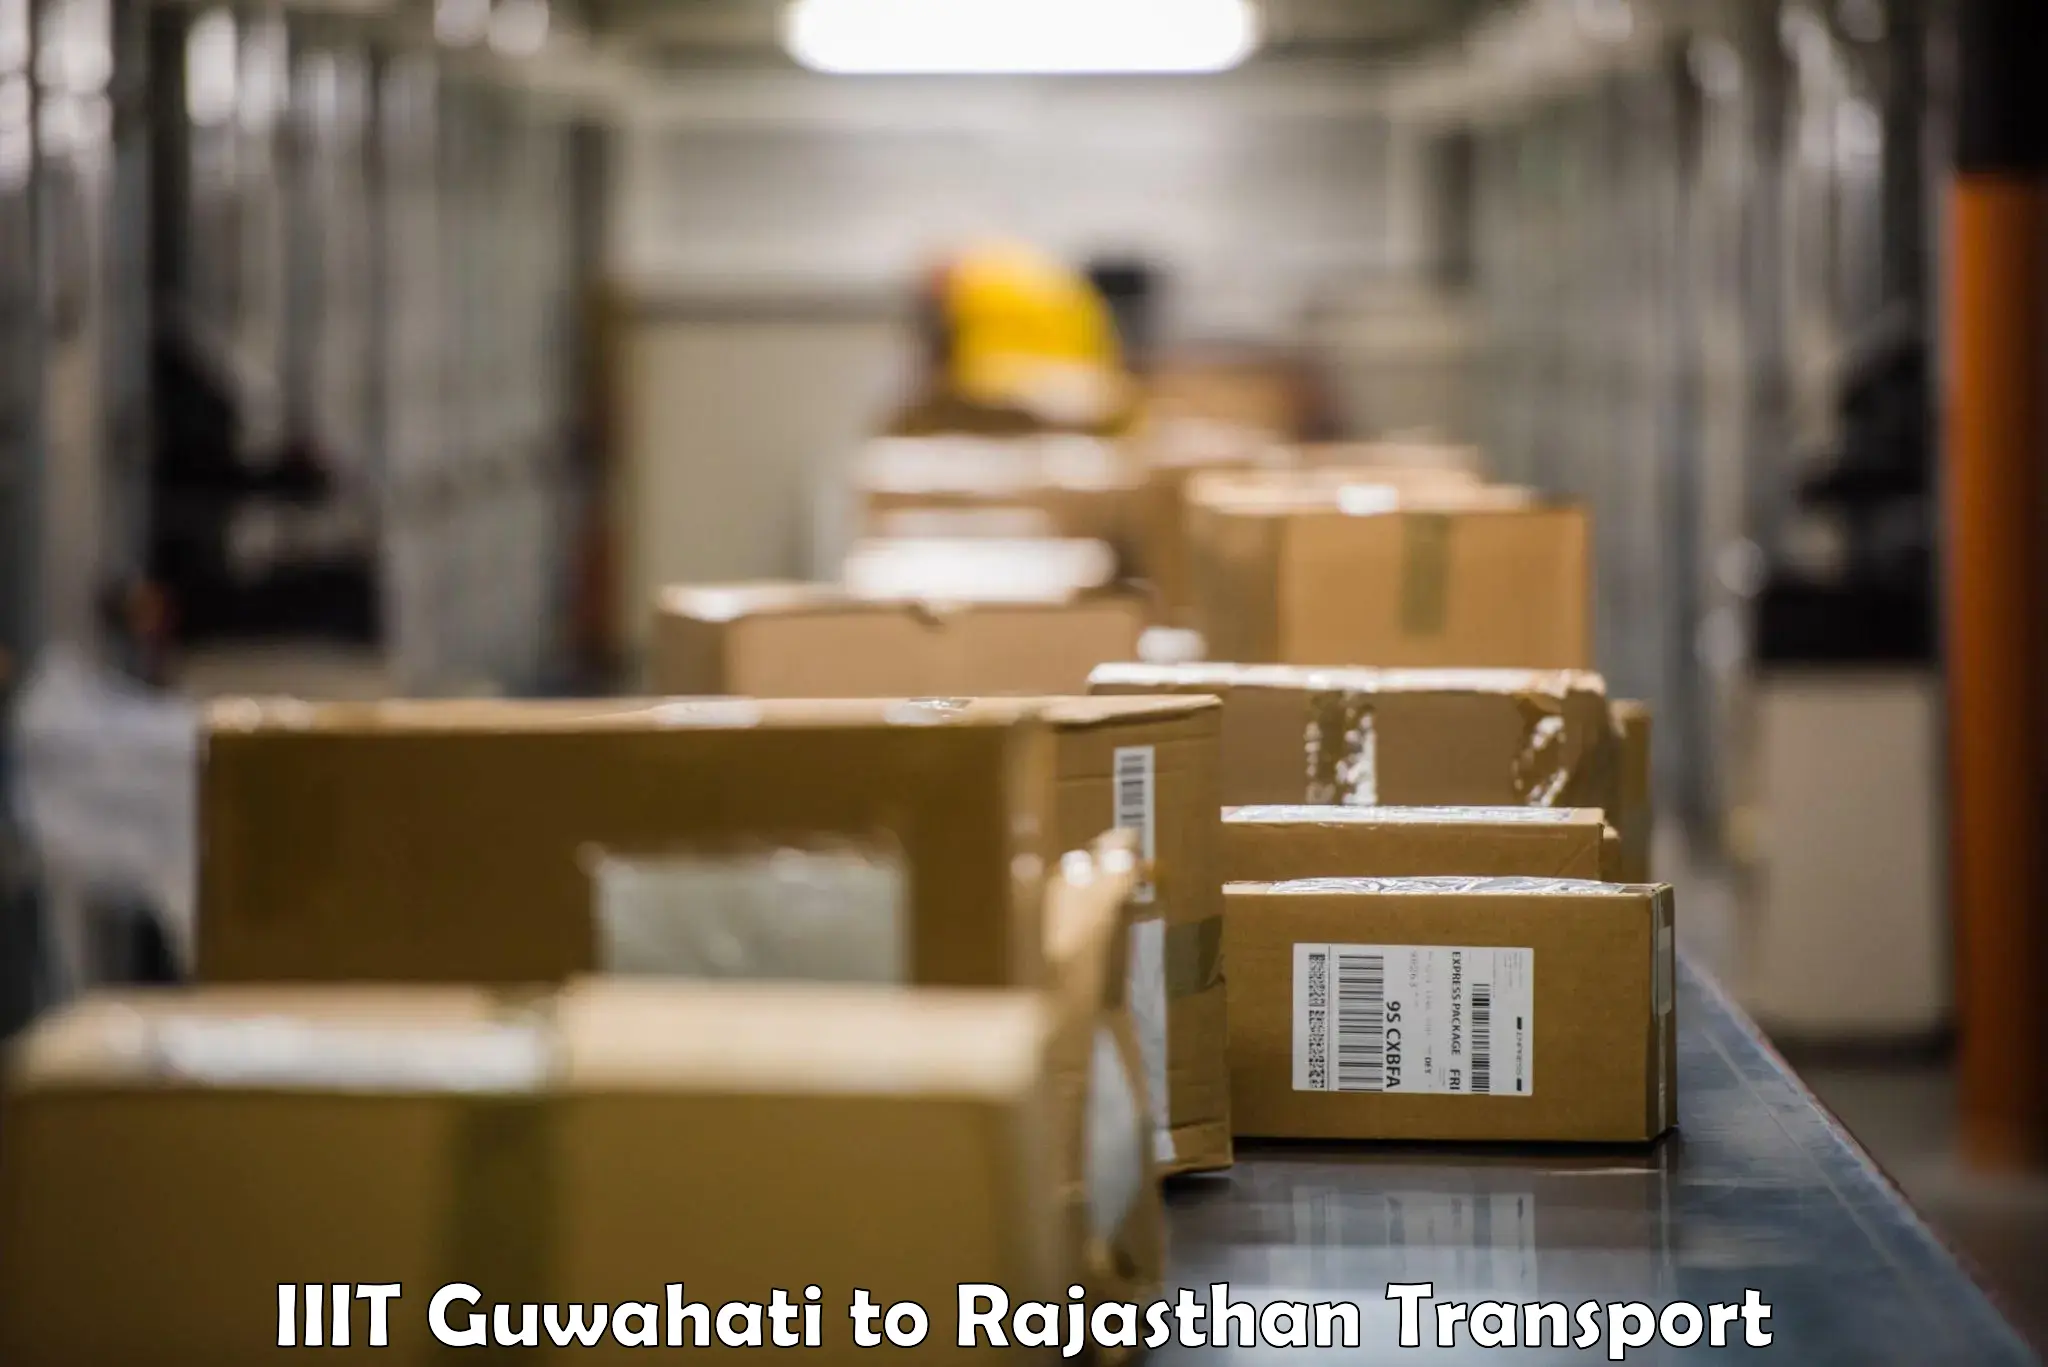 Road transport online services IIIT Guwahati to Mathania